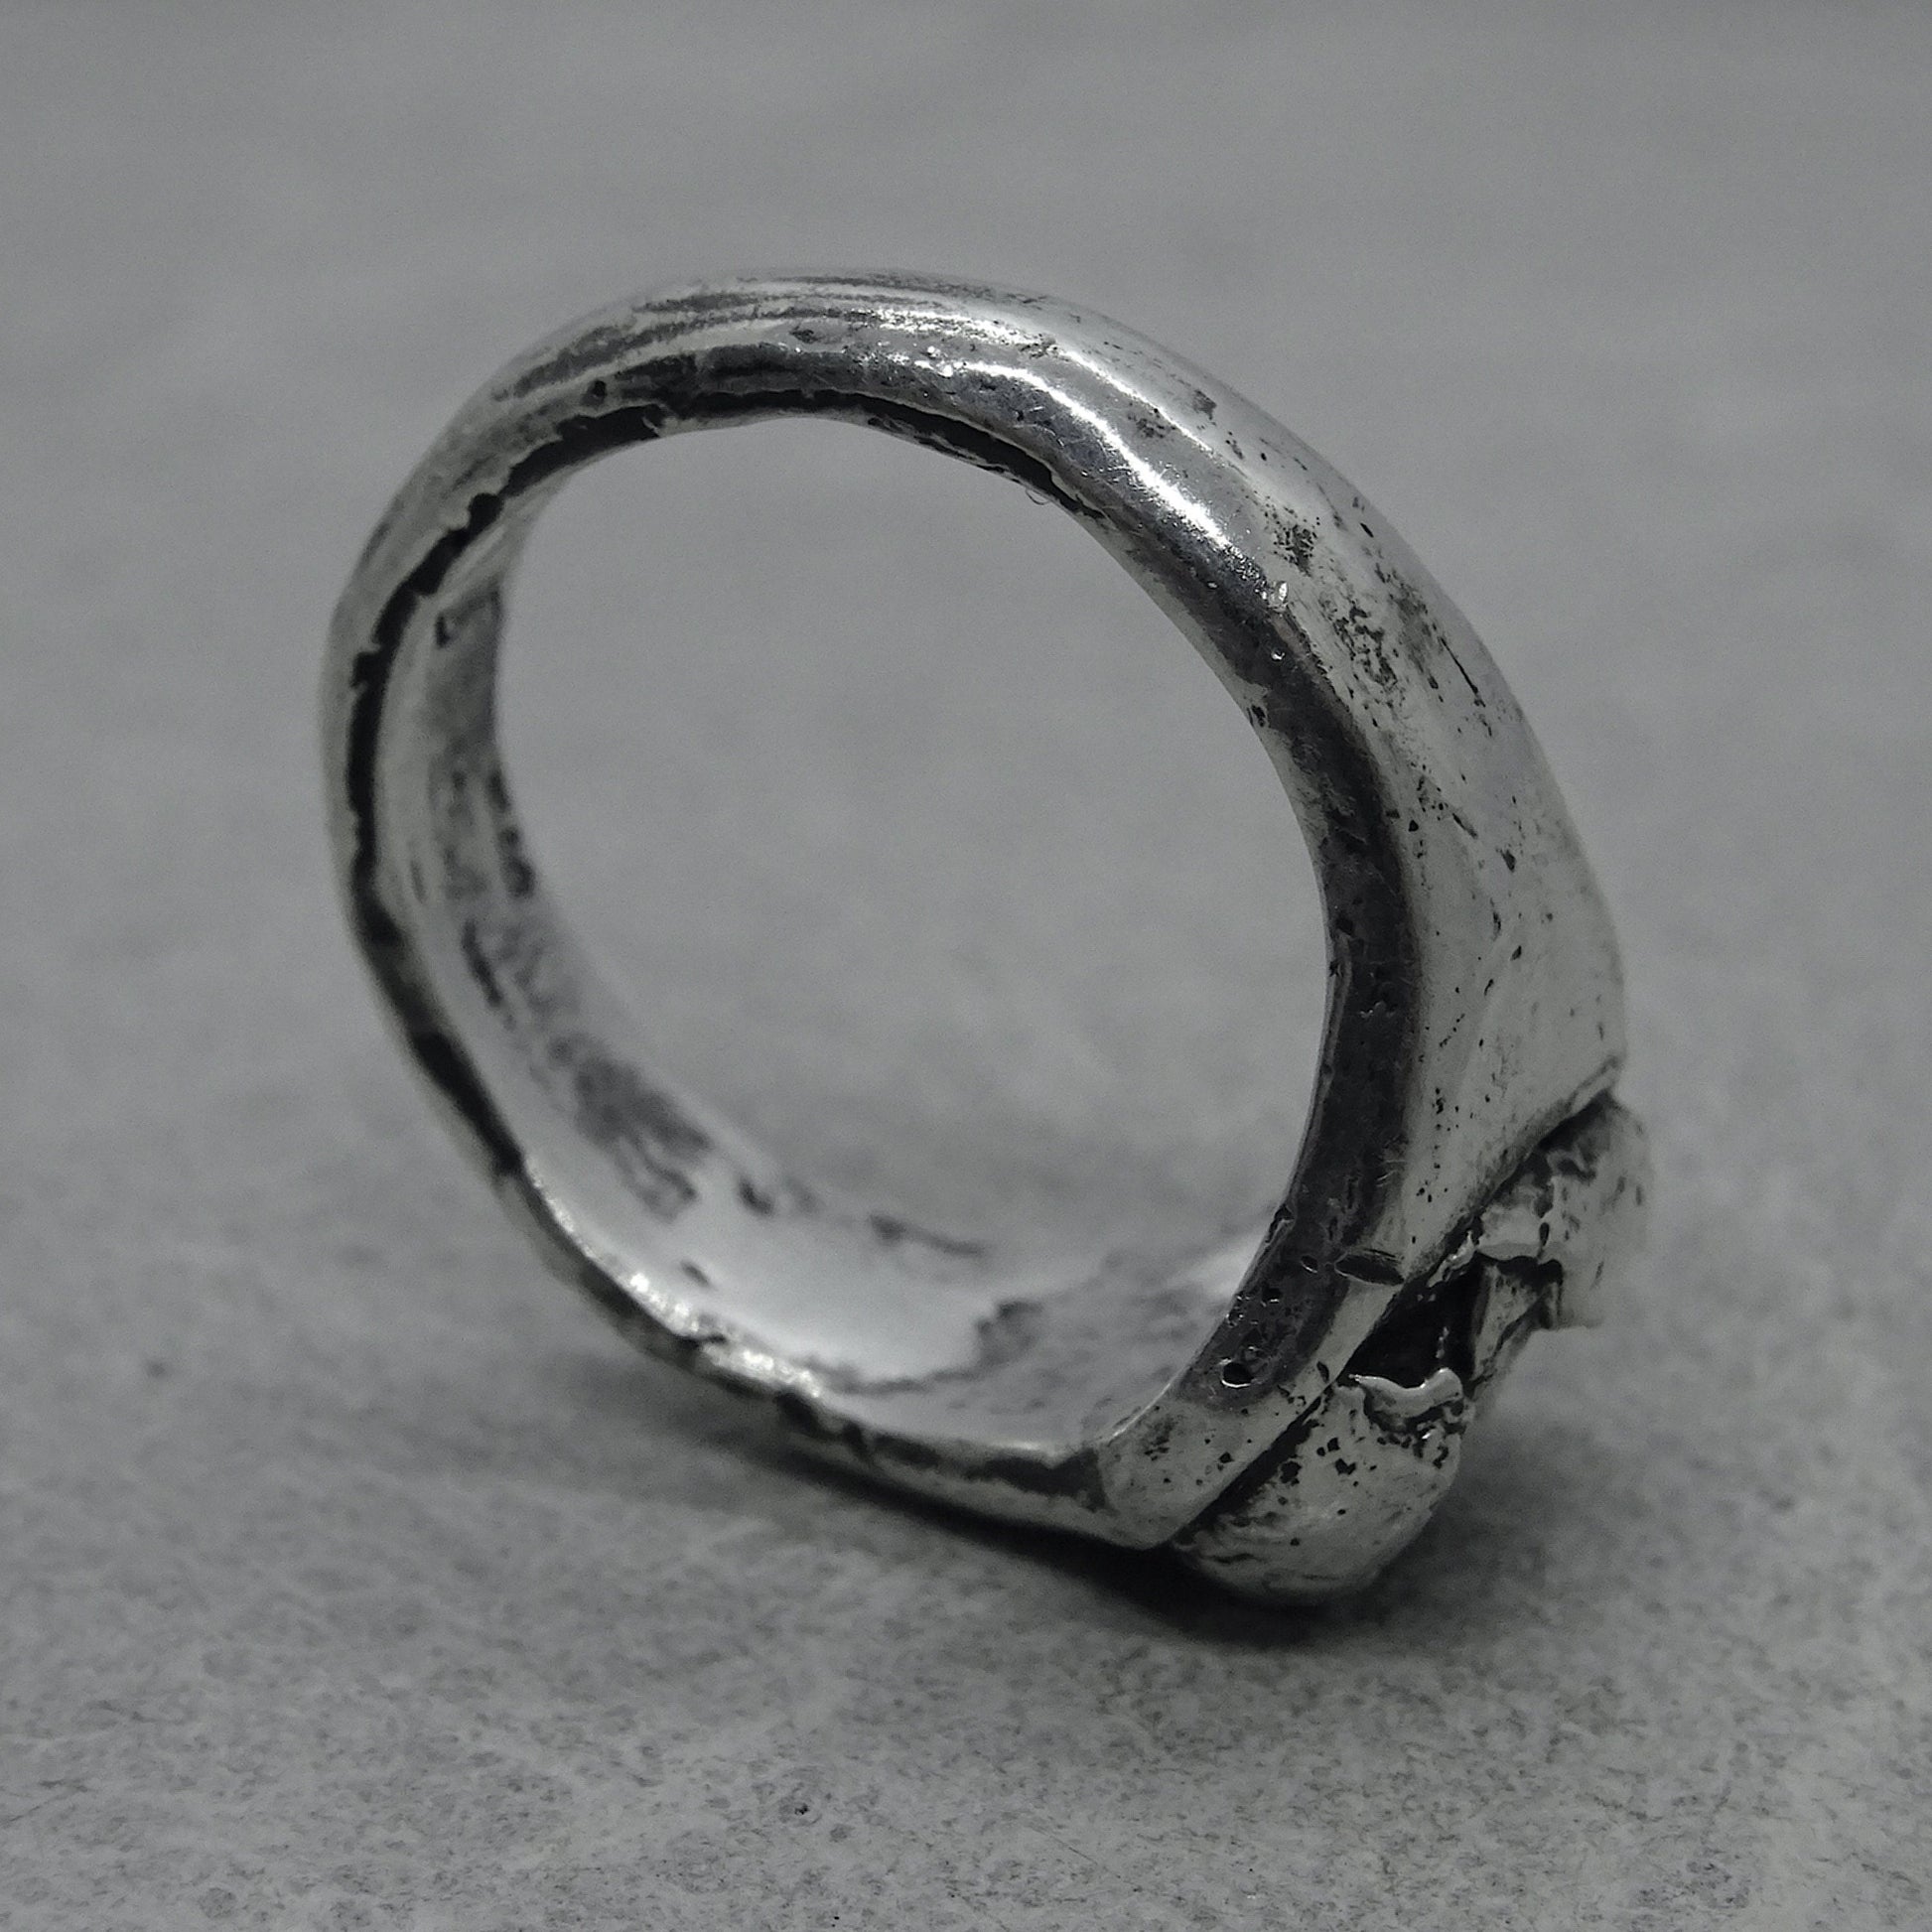 5th Element ring- oval signet ring with smooth texture Rings with smooth texture Project50g 